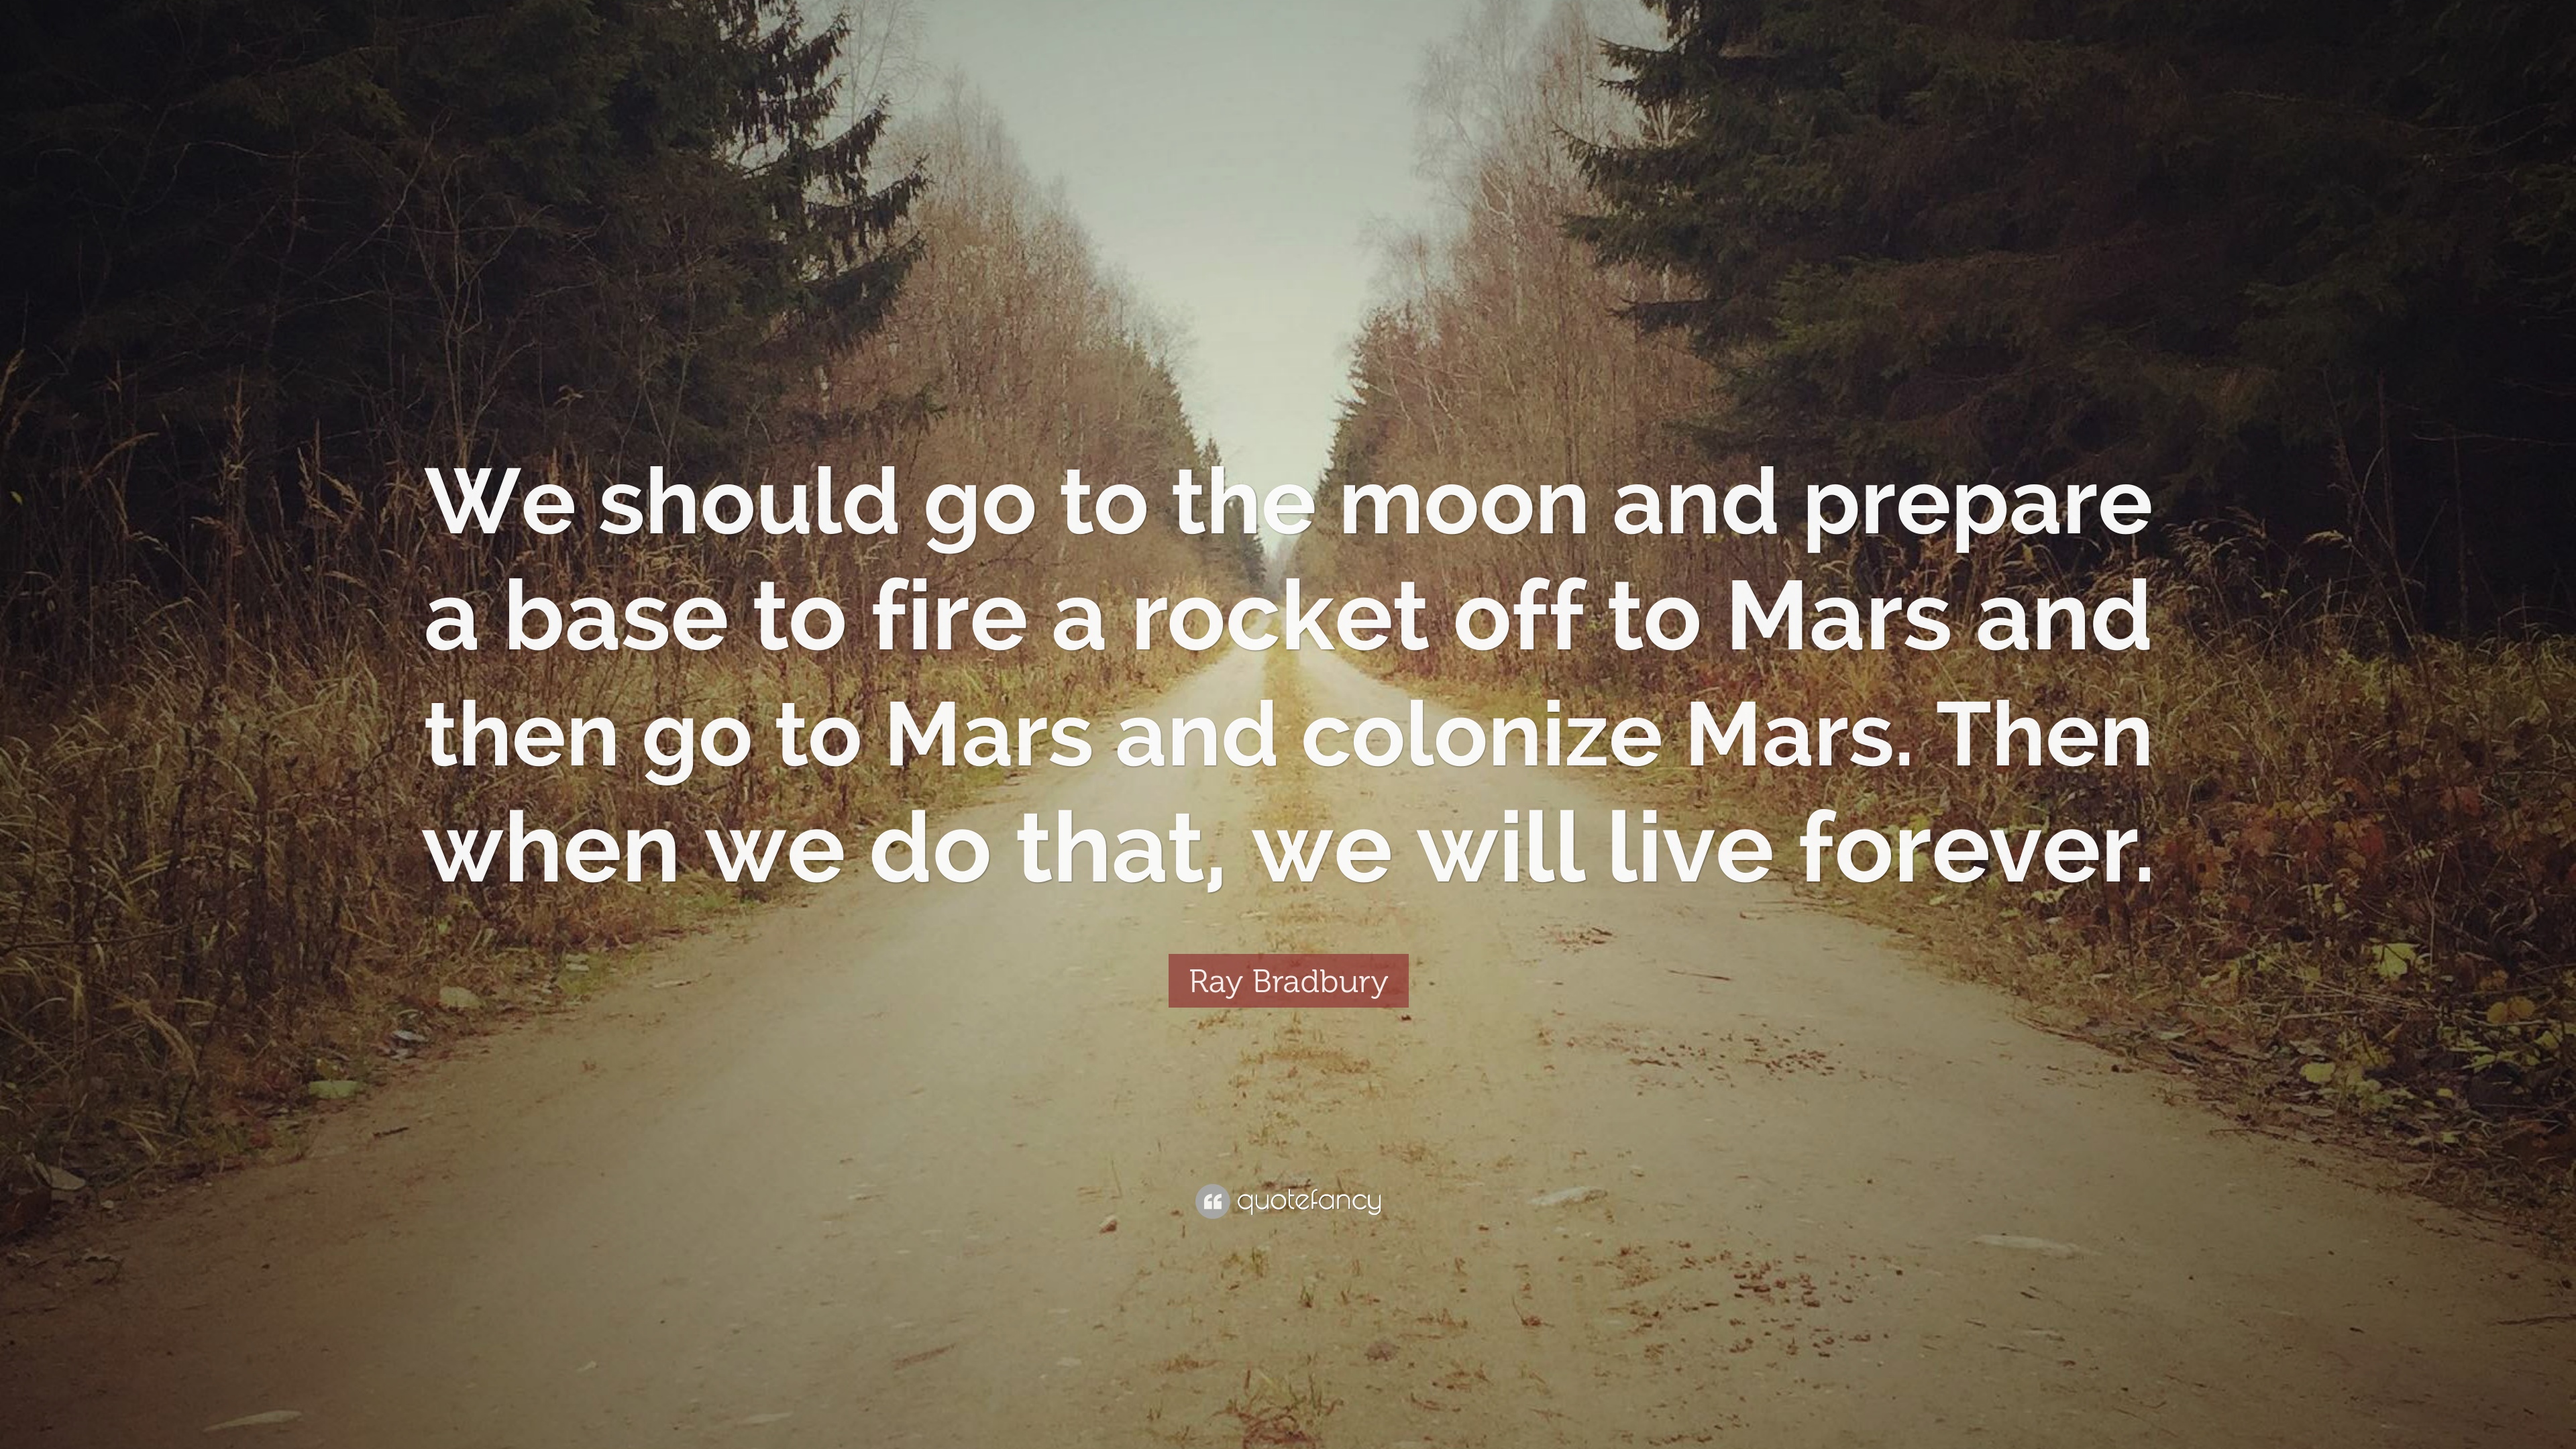 Ray Bradbury Quote: “We should go to the moon and prepare a